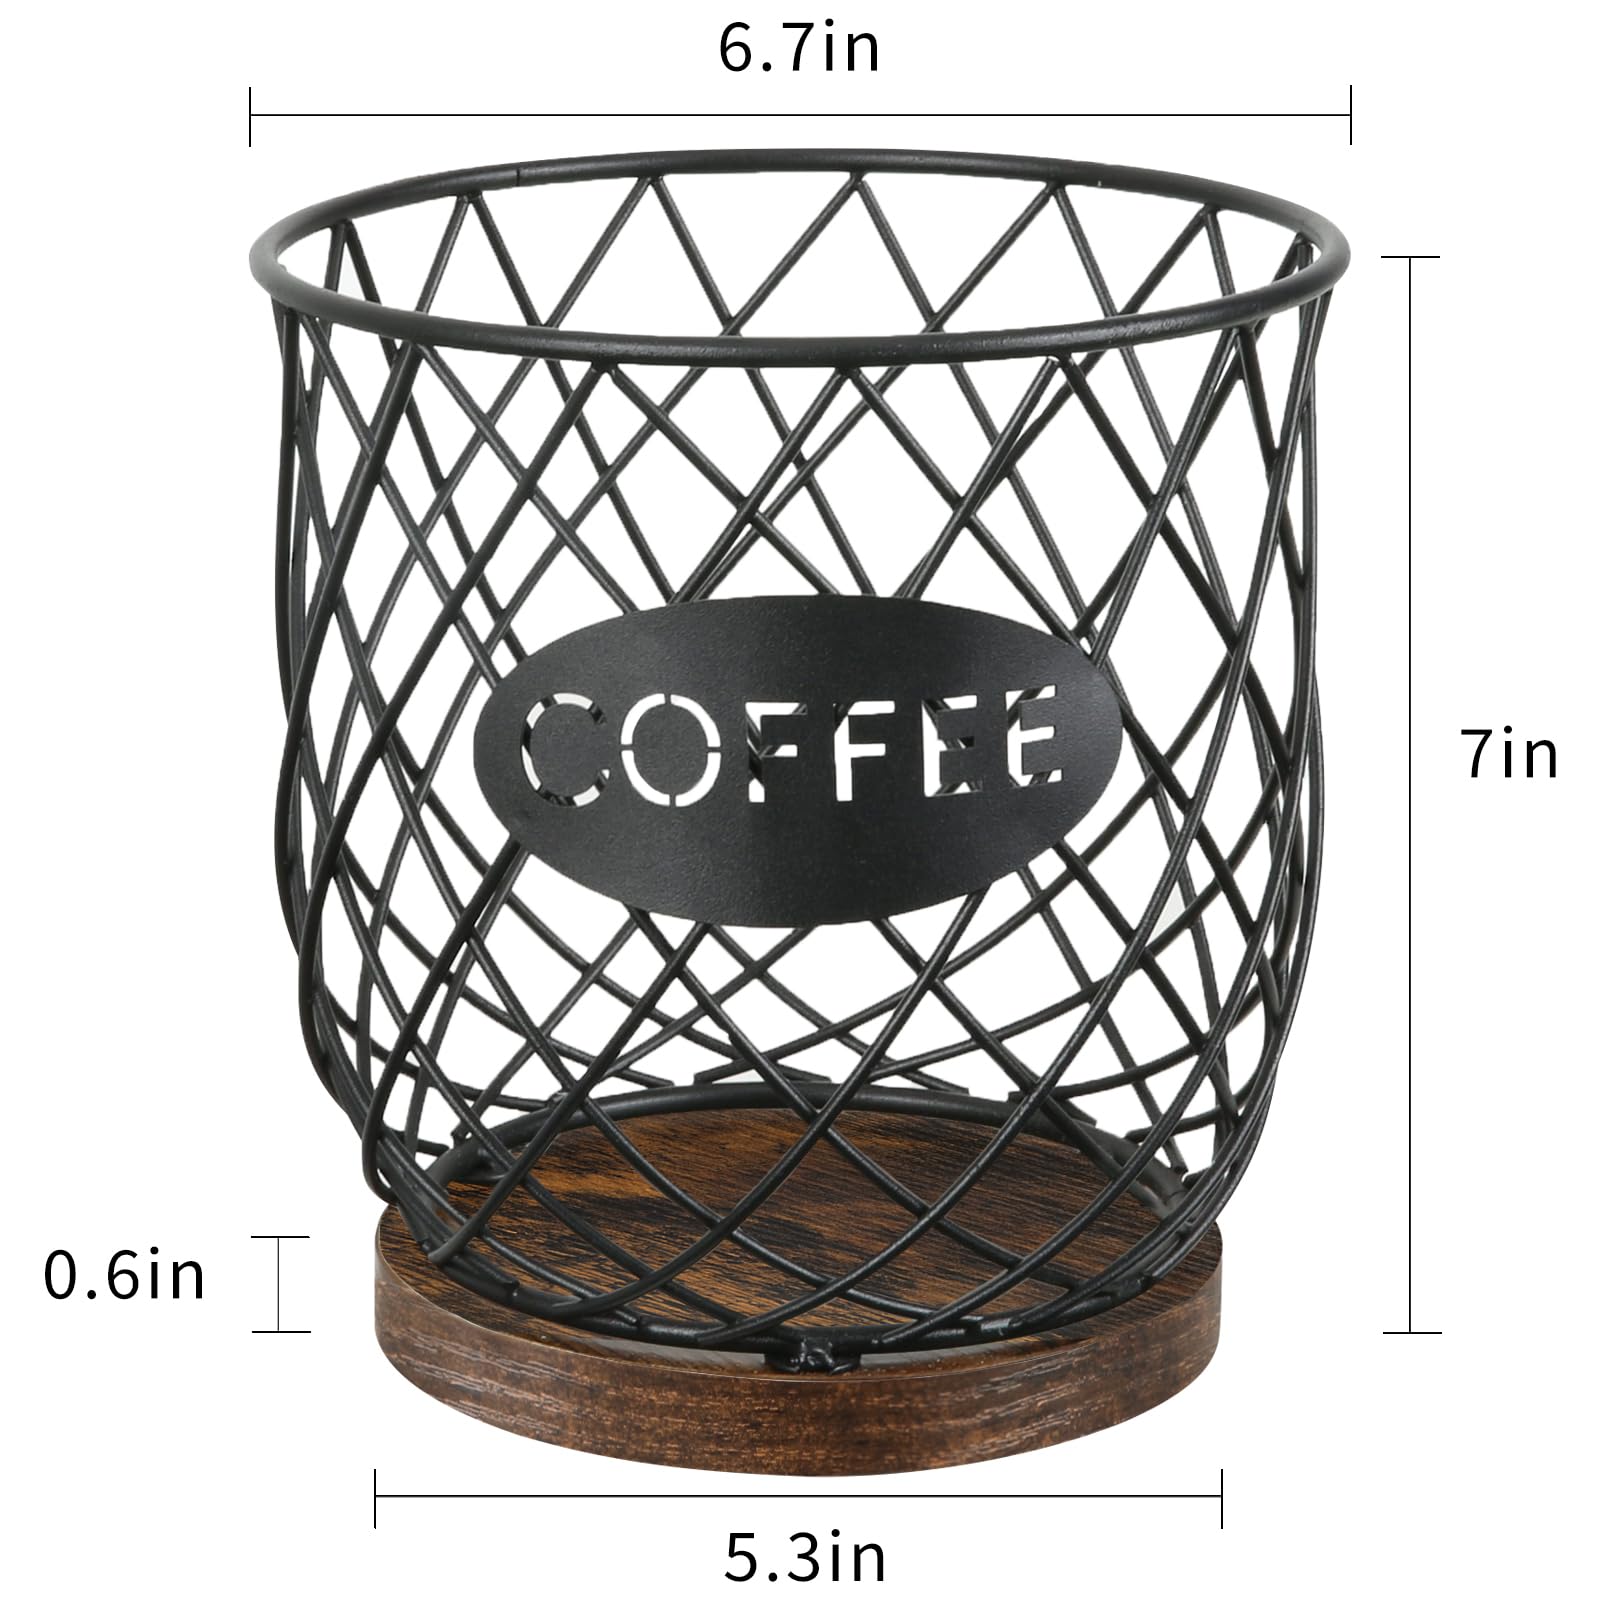 YINMIT K Cup Holder Organizer, Sturdy Coffee Pod Holder Organizer, 35 Kcup Large Capacity Storage Basket for Kitchen Counter and Office Desktop (Circular Grid)